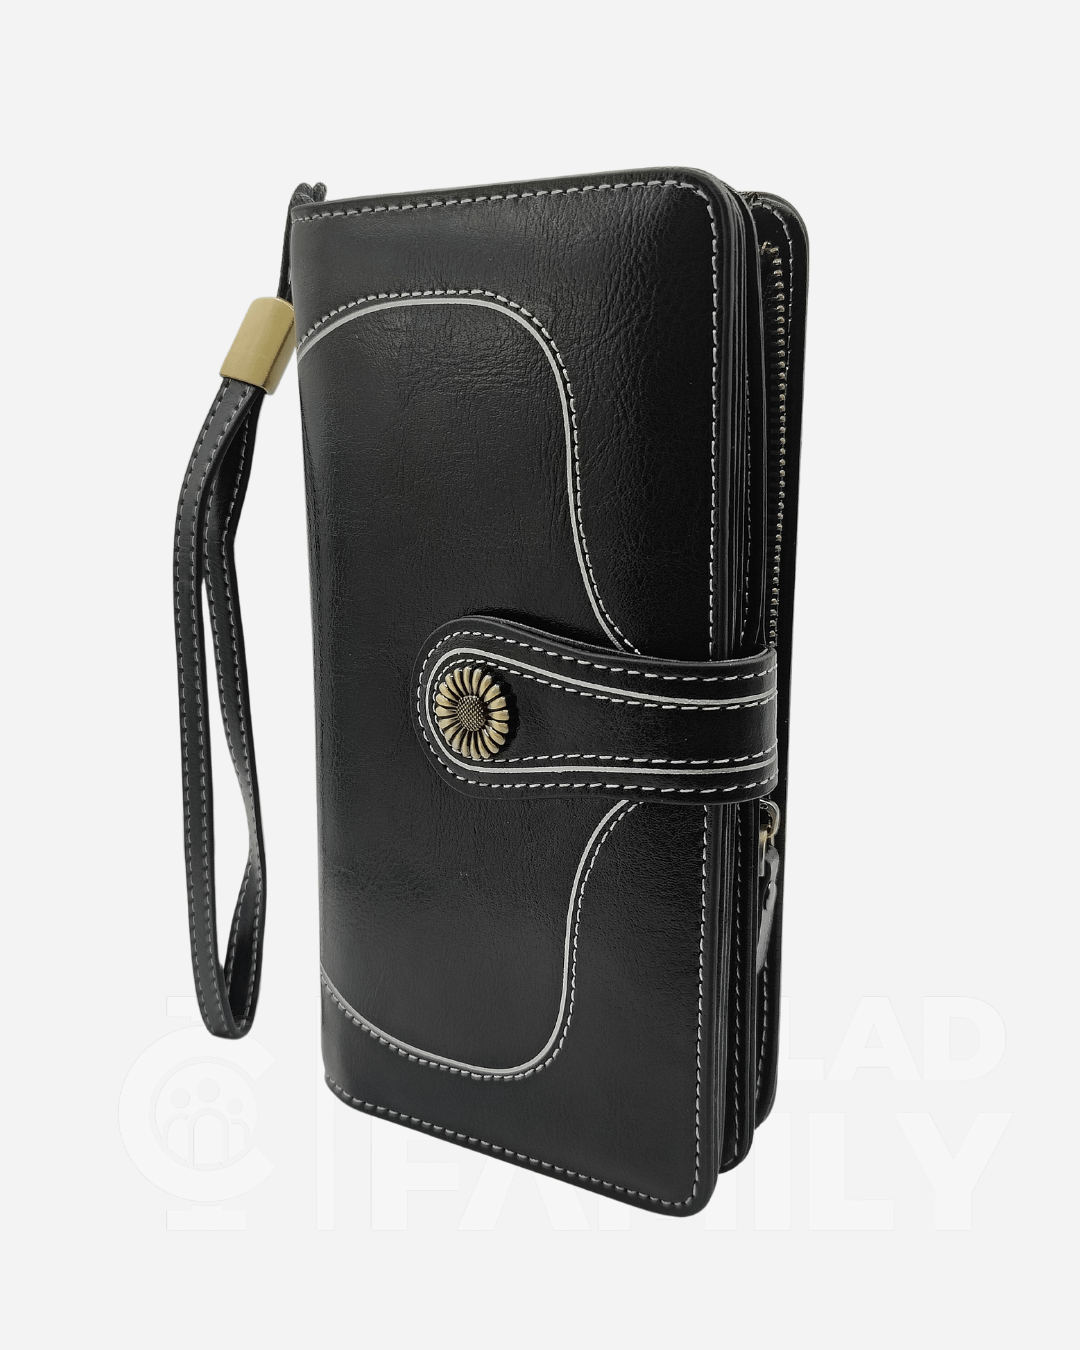 Black RFID Blocking Large Capacity Leather Wallet featuring two compartments